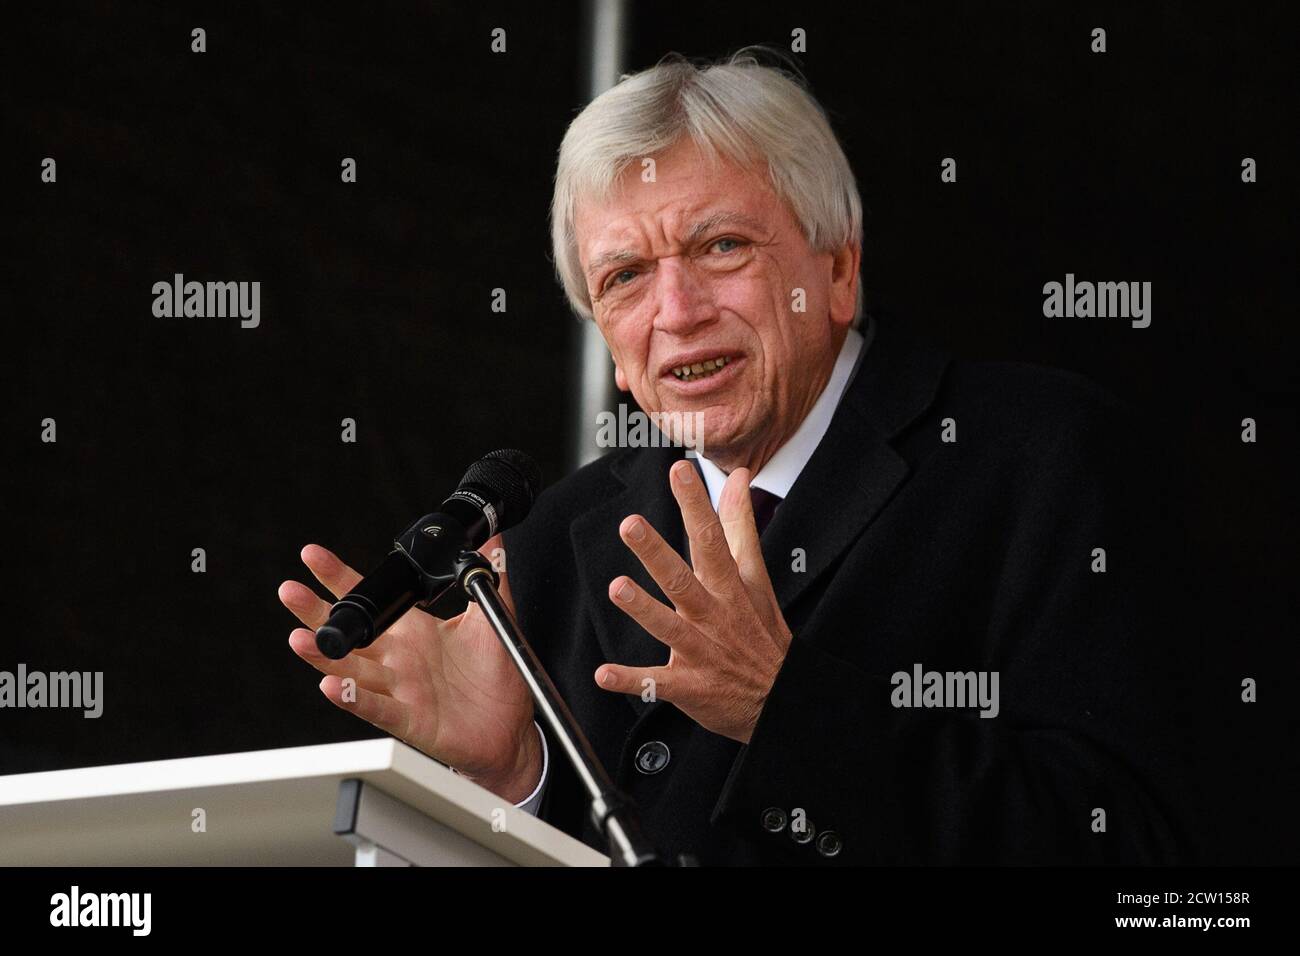 Wolfhagen, Germany. 25th Sep, 2020. Volker Bouffier (CDU), Prime Minister of Hesse, speaks at the ceremony to mark the renaming of the Wilhelm Filchner School to Walter Lübcke School. Former Kassel District President Walter Lübcke was murdered on the terrace of his house in Wolfhagen-Istha on the night of 02.06.2019. Credit: Swen Pförtner/dpa/Alamy Live News Stock Photo